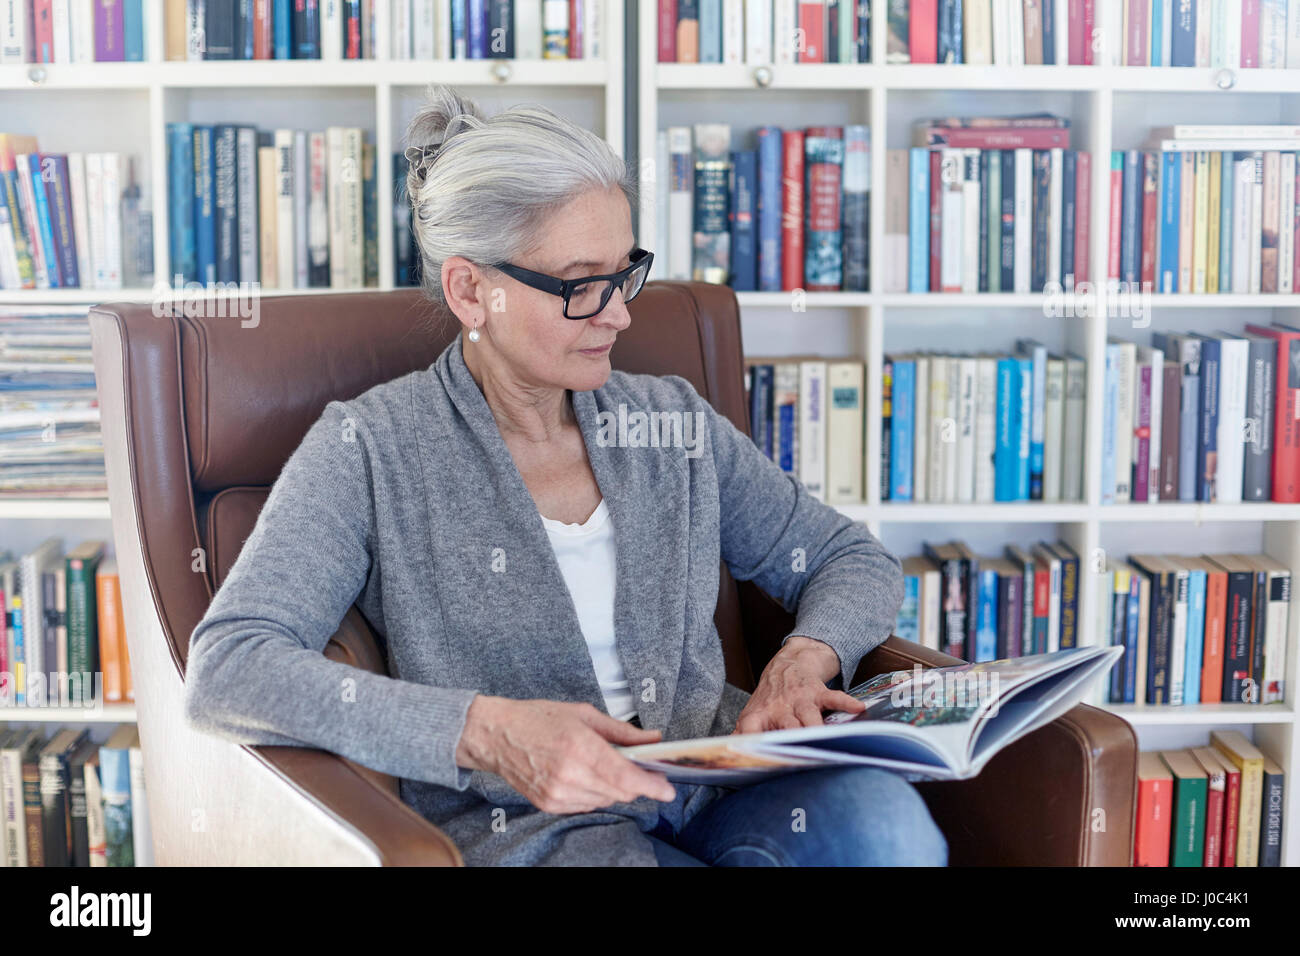 Senior woman sitting in chair in library, reading book Stock Photo